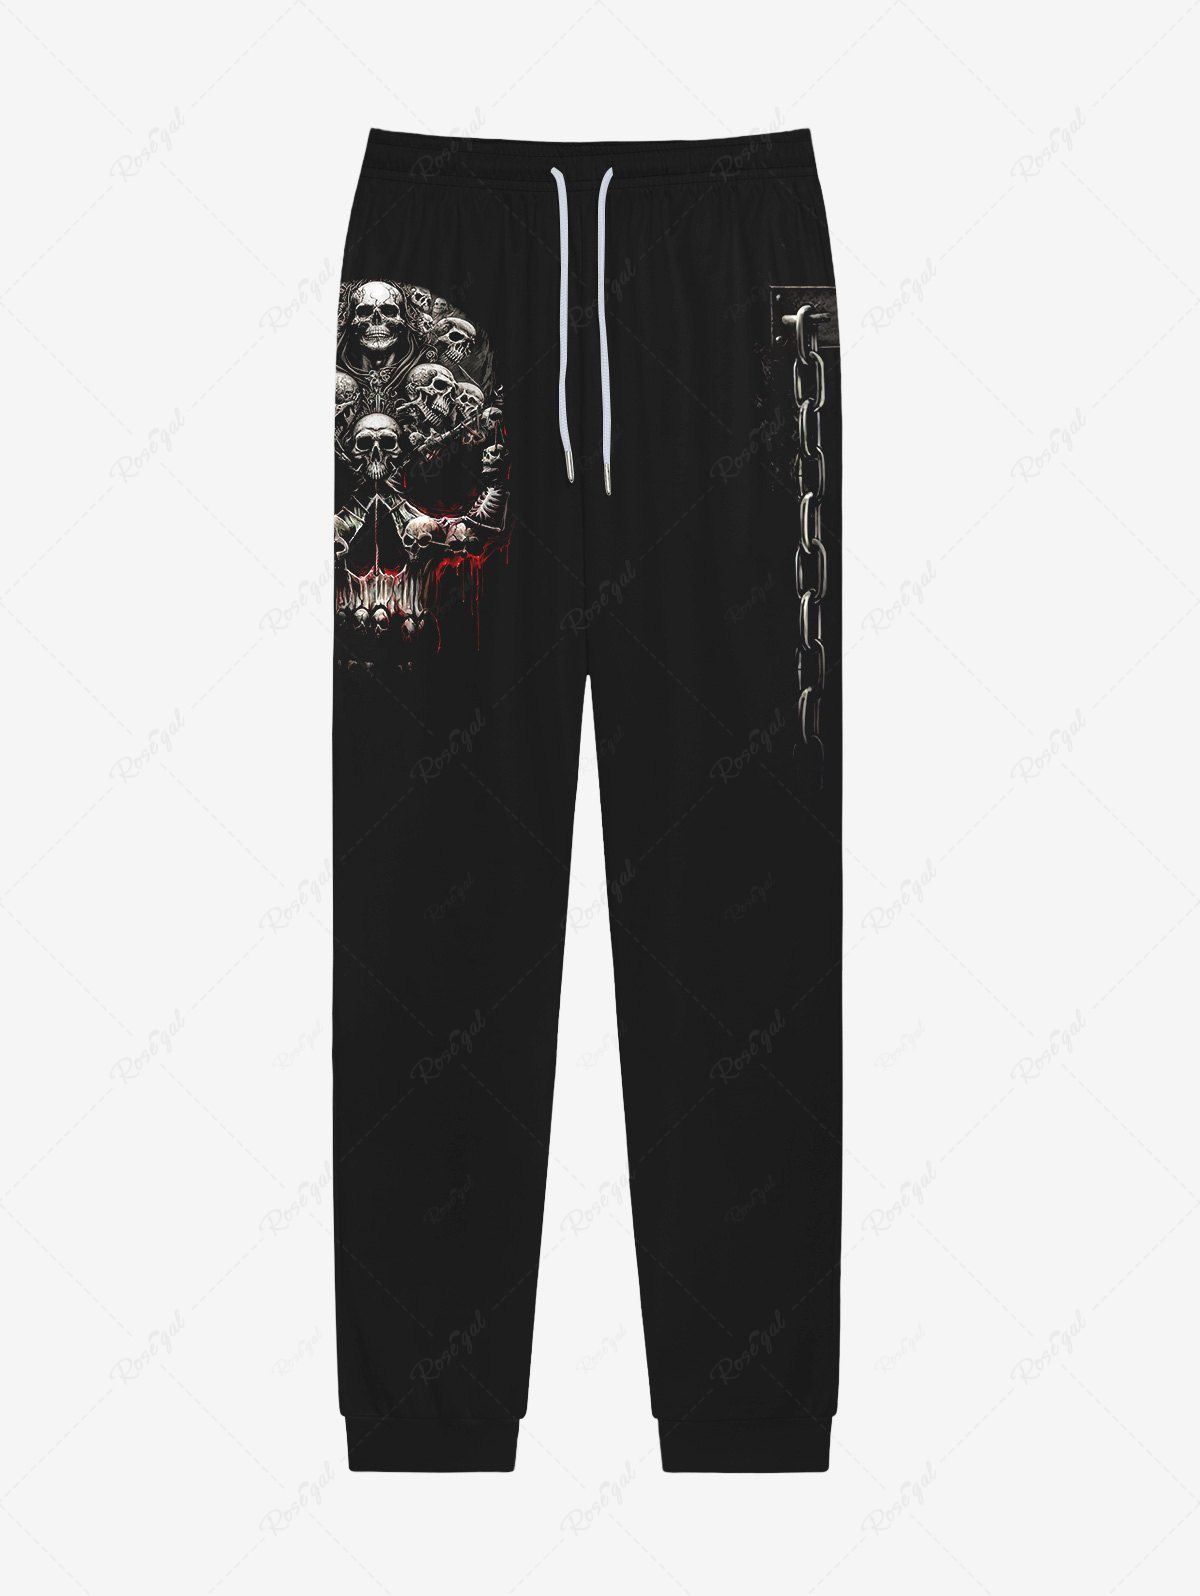 New Gothic 3D Bloody Skulls Chain Print Halloween Drawstring Pockets Pull On Pants For Men  